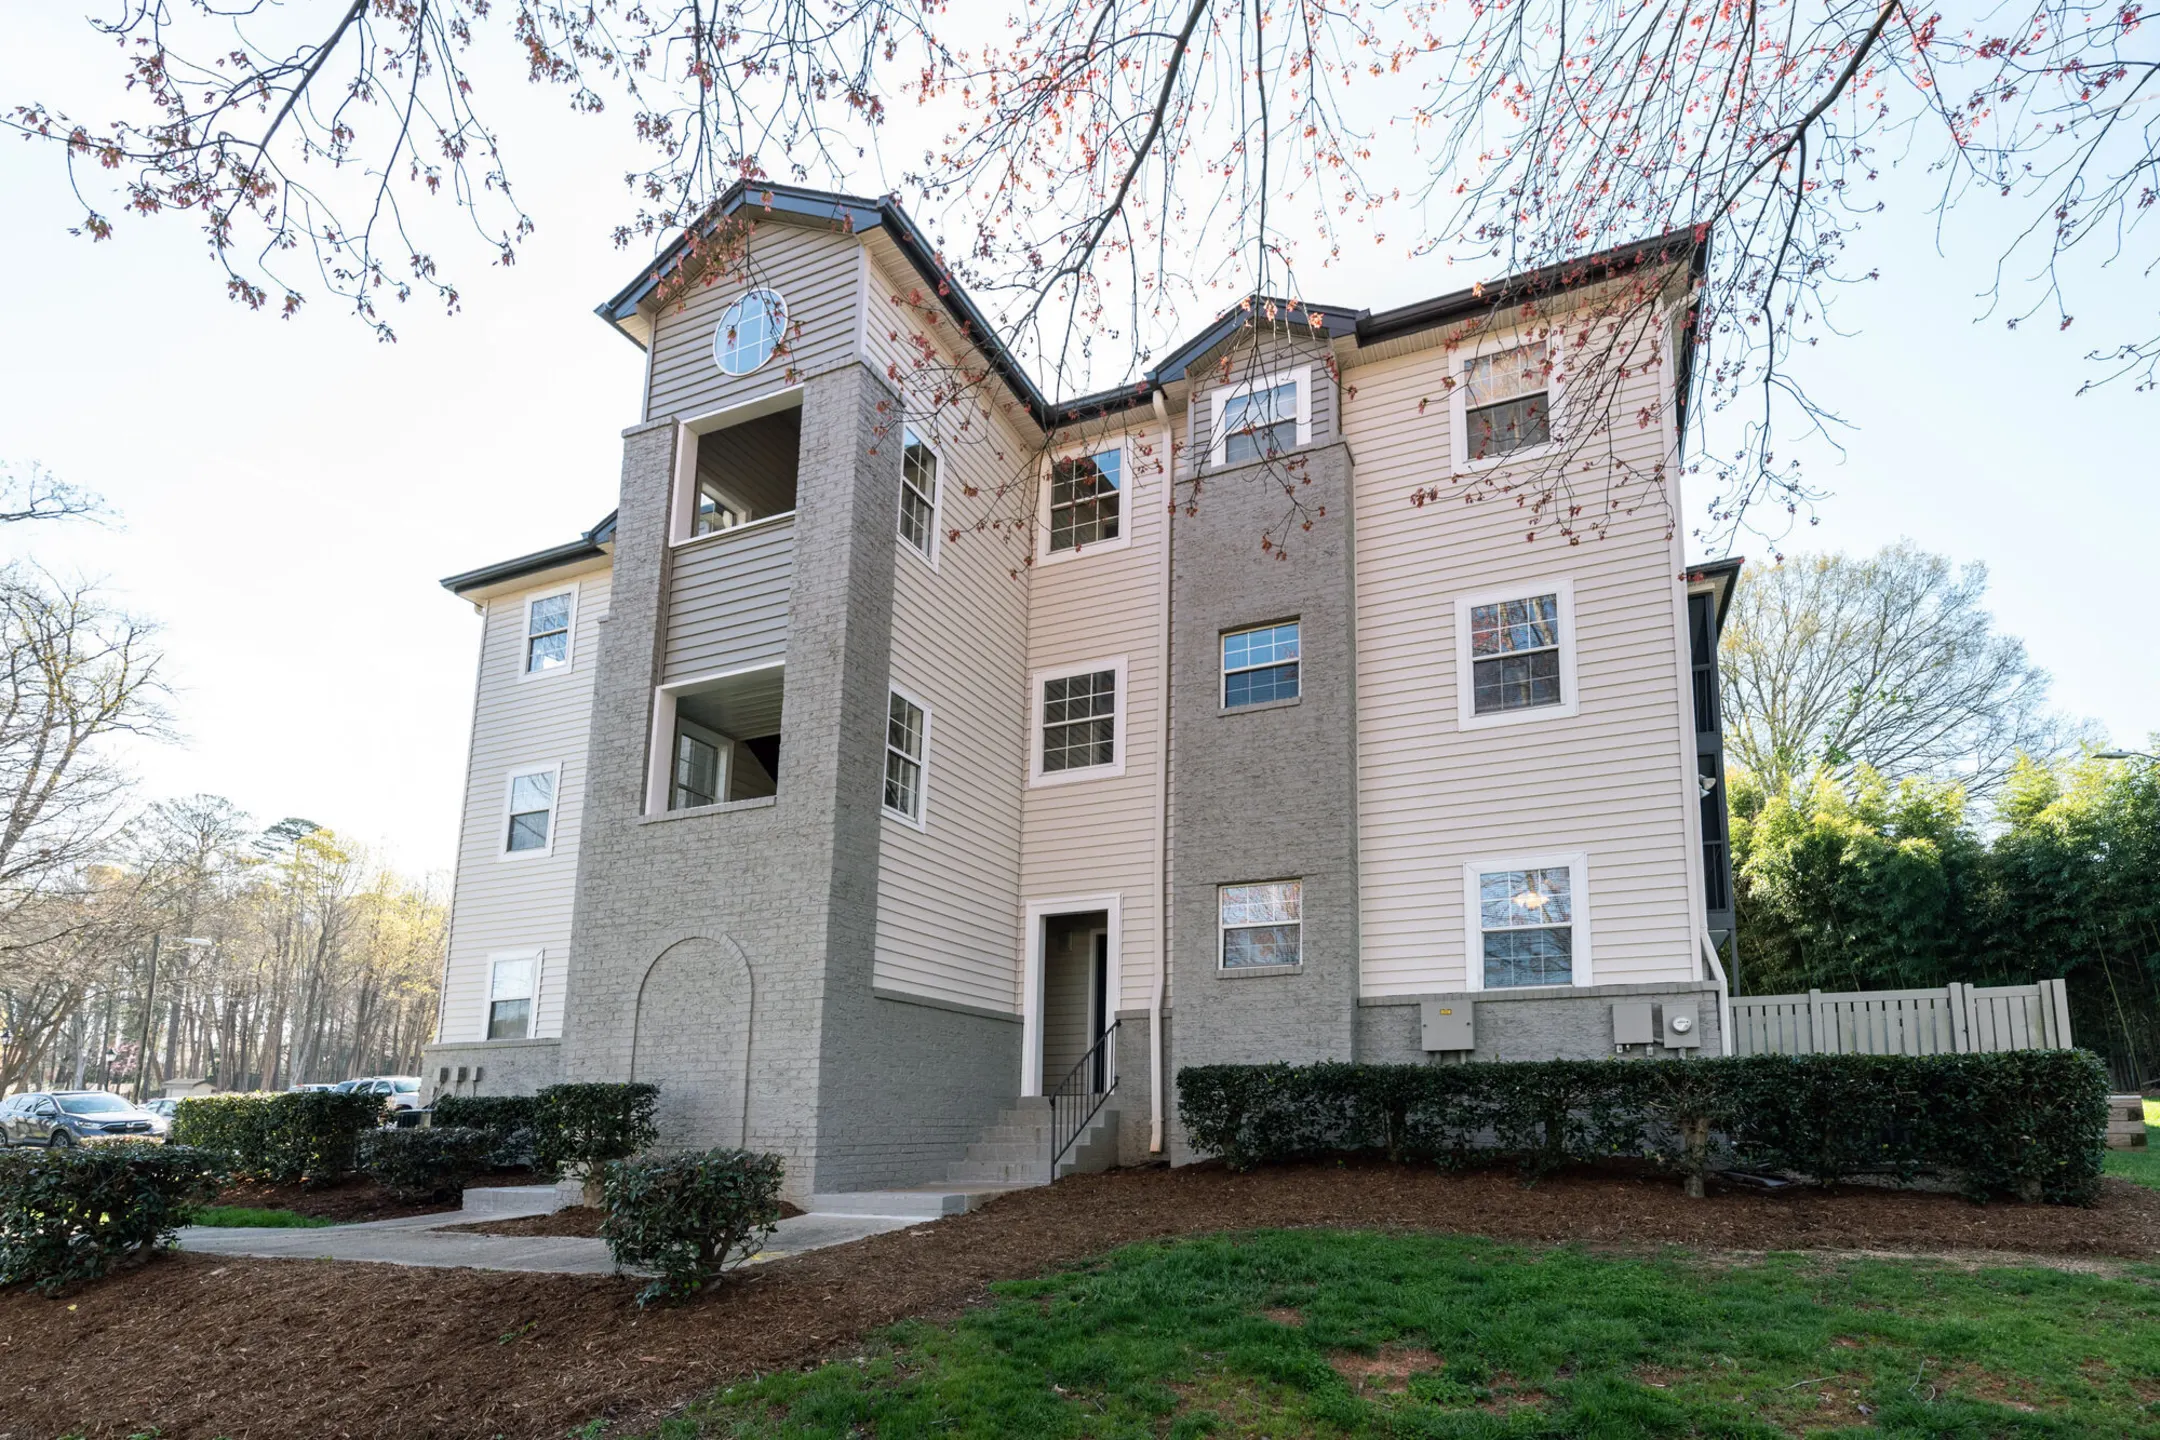 Building - Biscayne Apartment Homes - Charlotte, NC